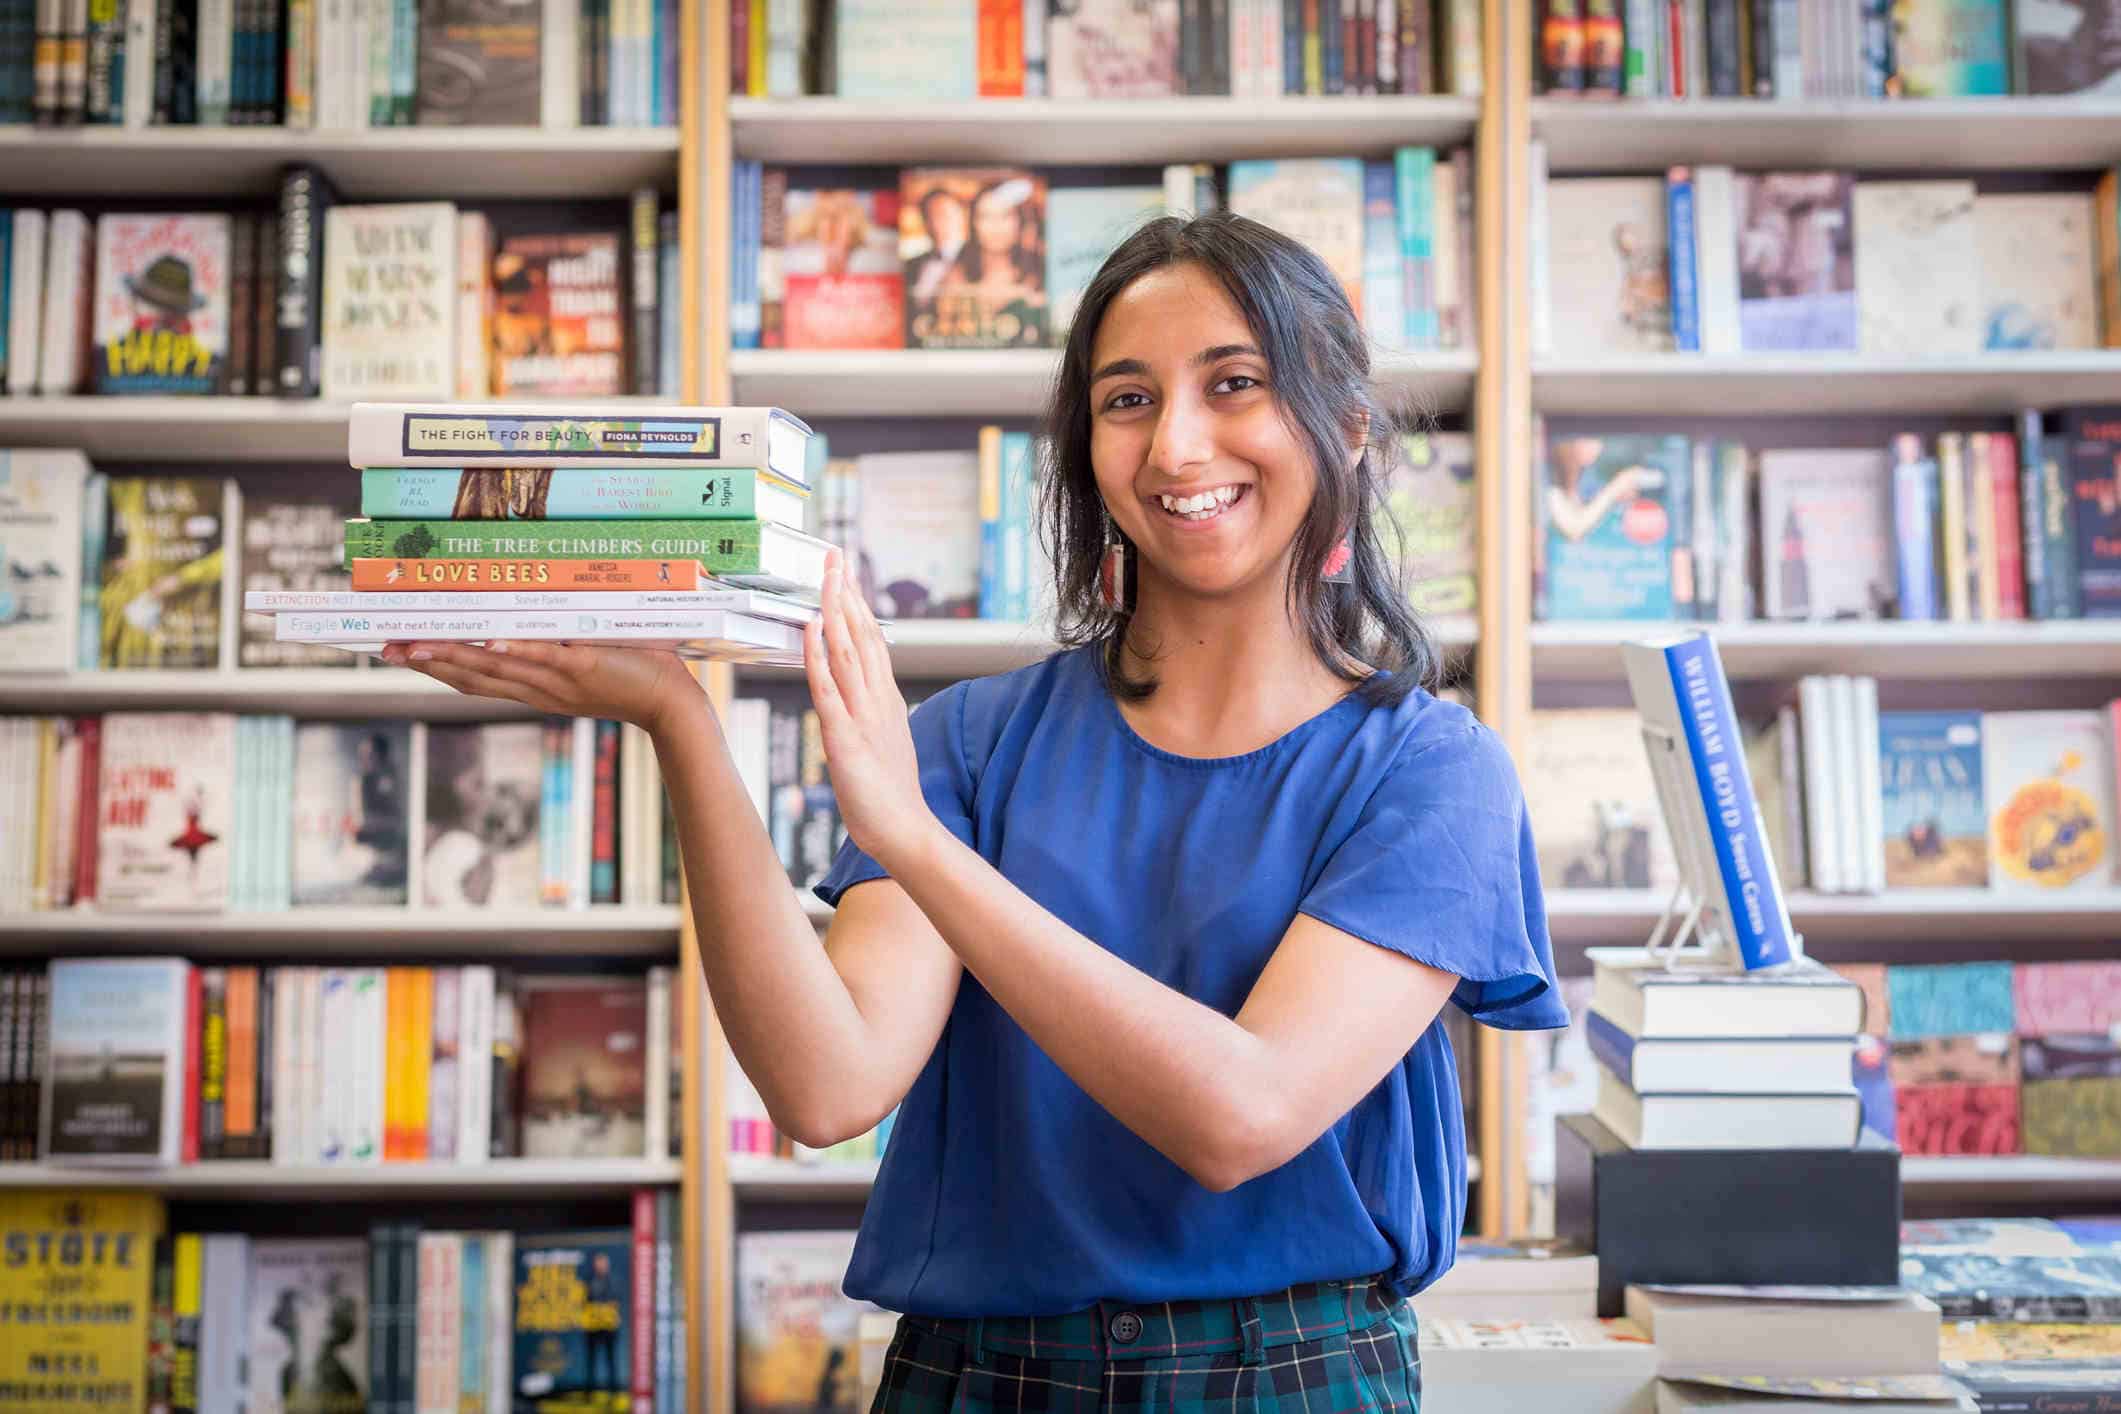 A brown person stands in a bookshop wearing a dark blue blouse. She is holding 5 books in her hand.